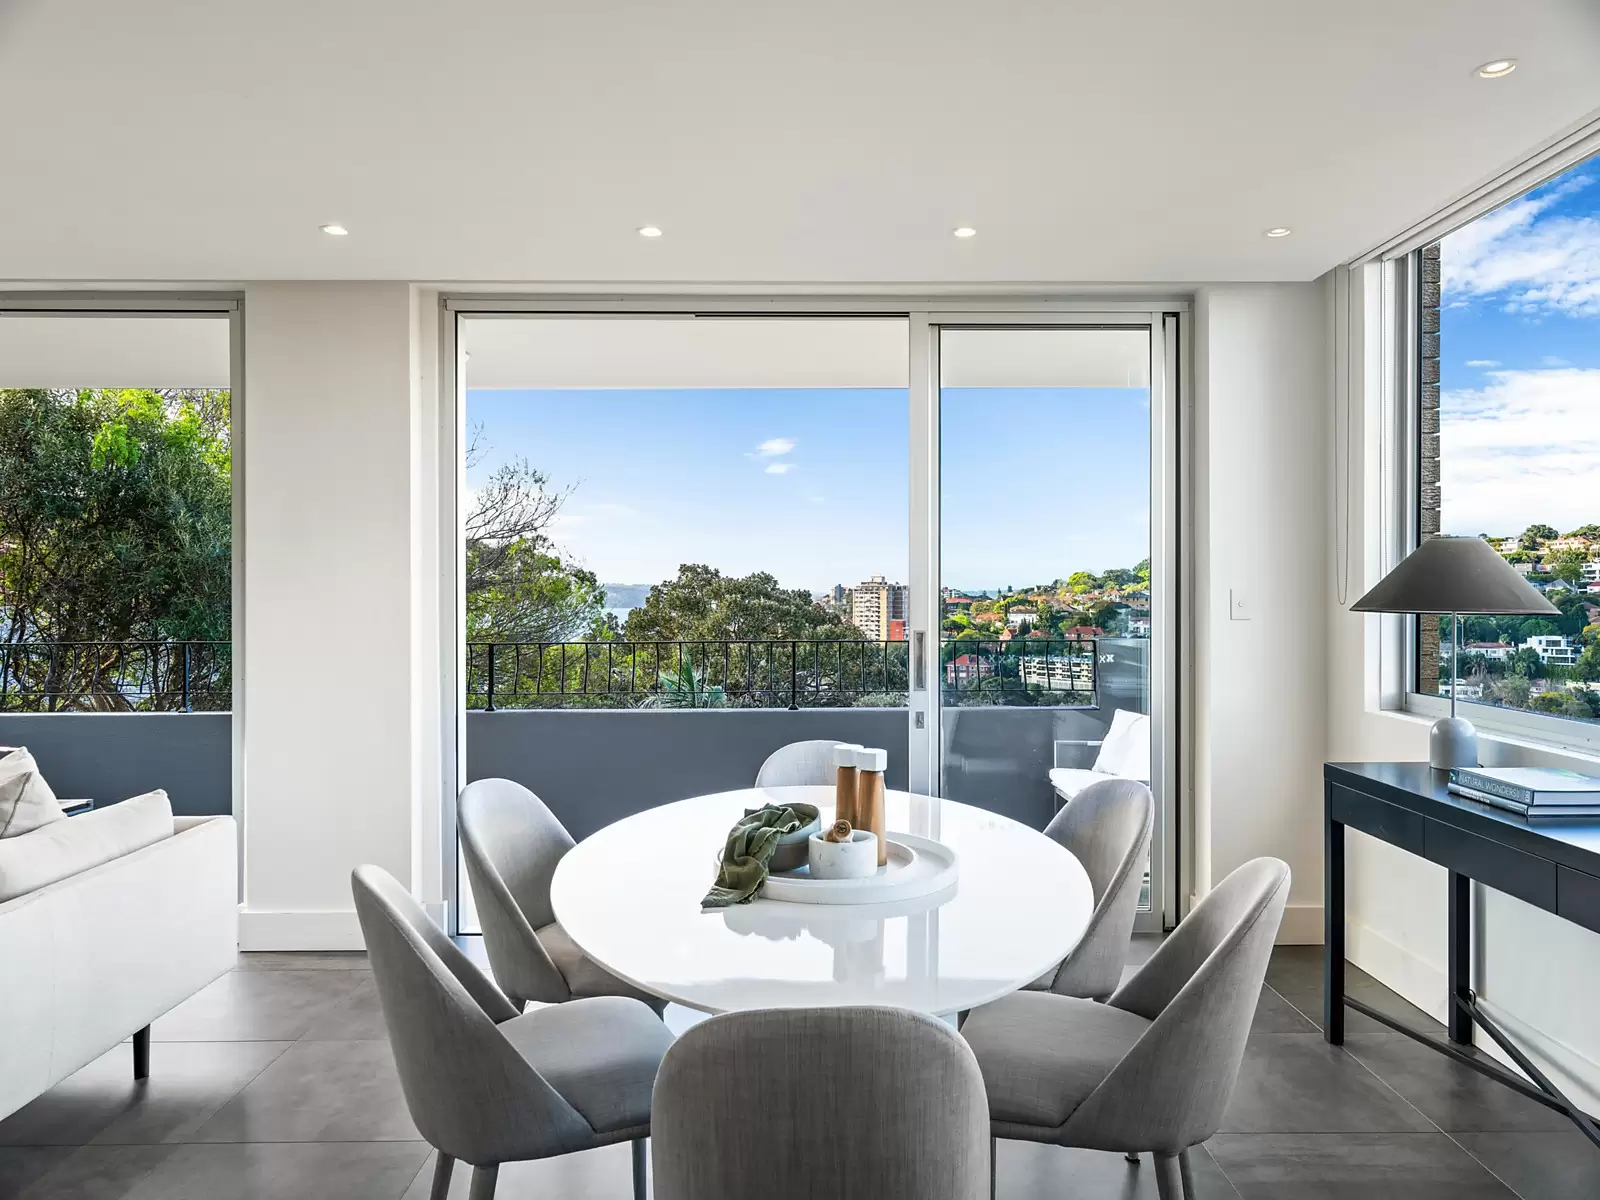 Photo #8: 13/321 Edgecliff Road, Woollahra - Sold by Sydney Sotheby's International Realty